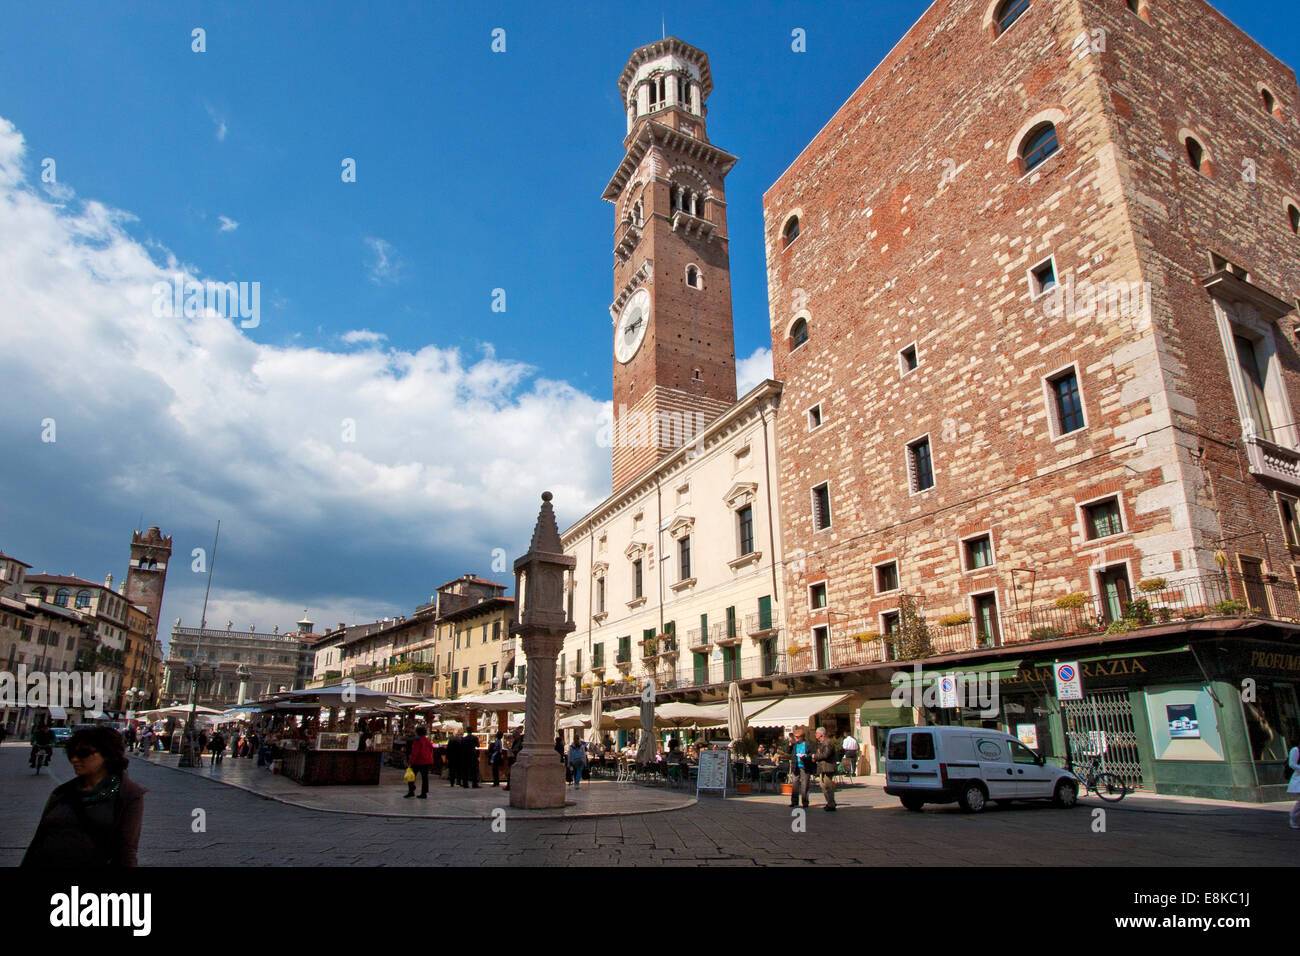 A view of Piazza delle Erbe with Lamberti Tower in Verona, Italy. Stock Photo